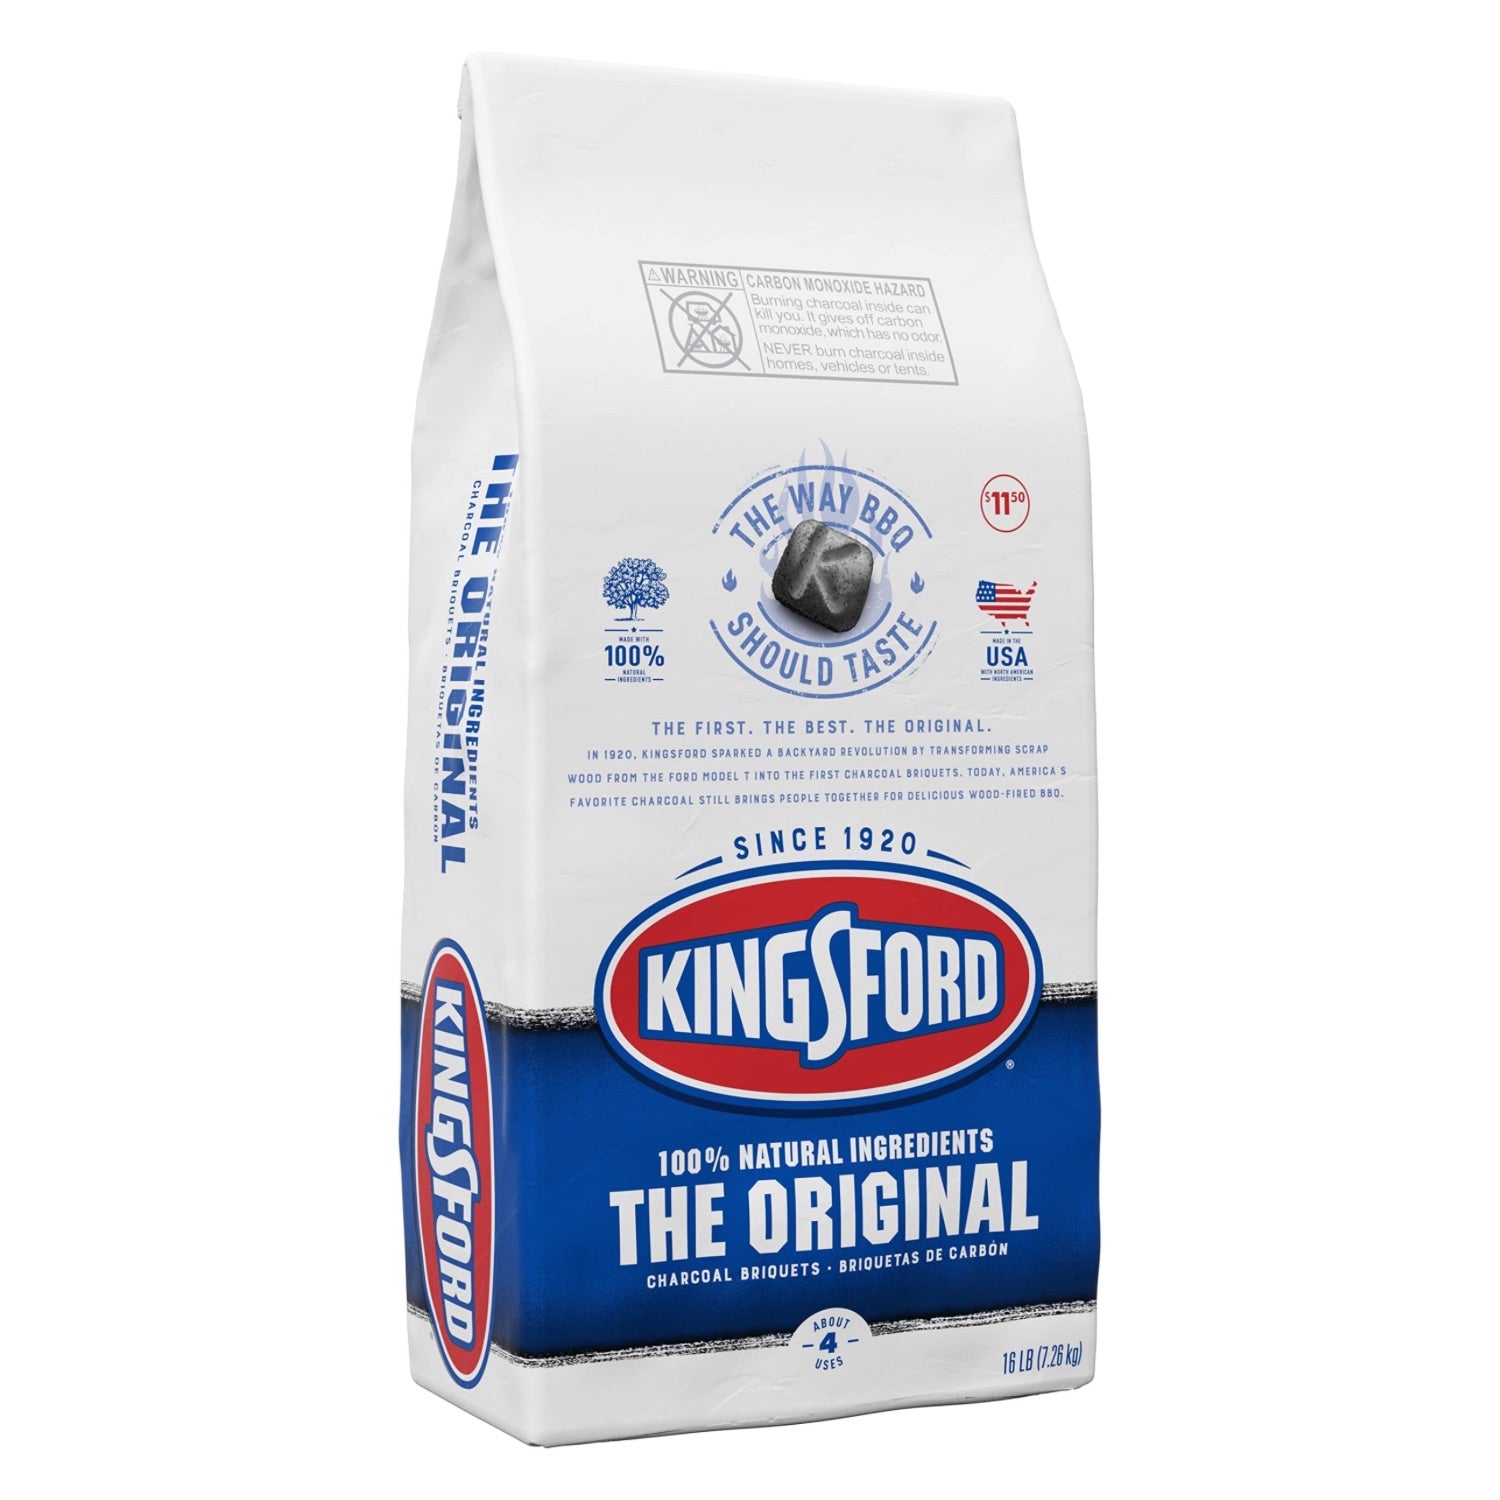 Kingsford Charcoal Briquettes for grilling by Meat King